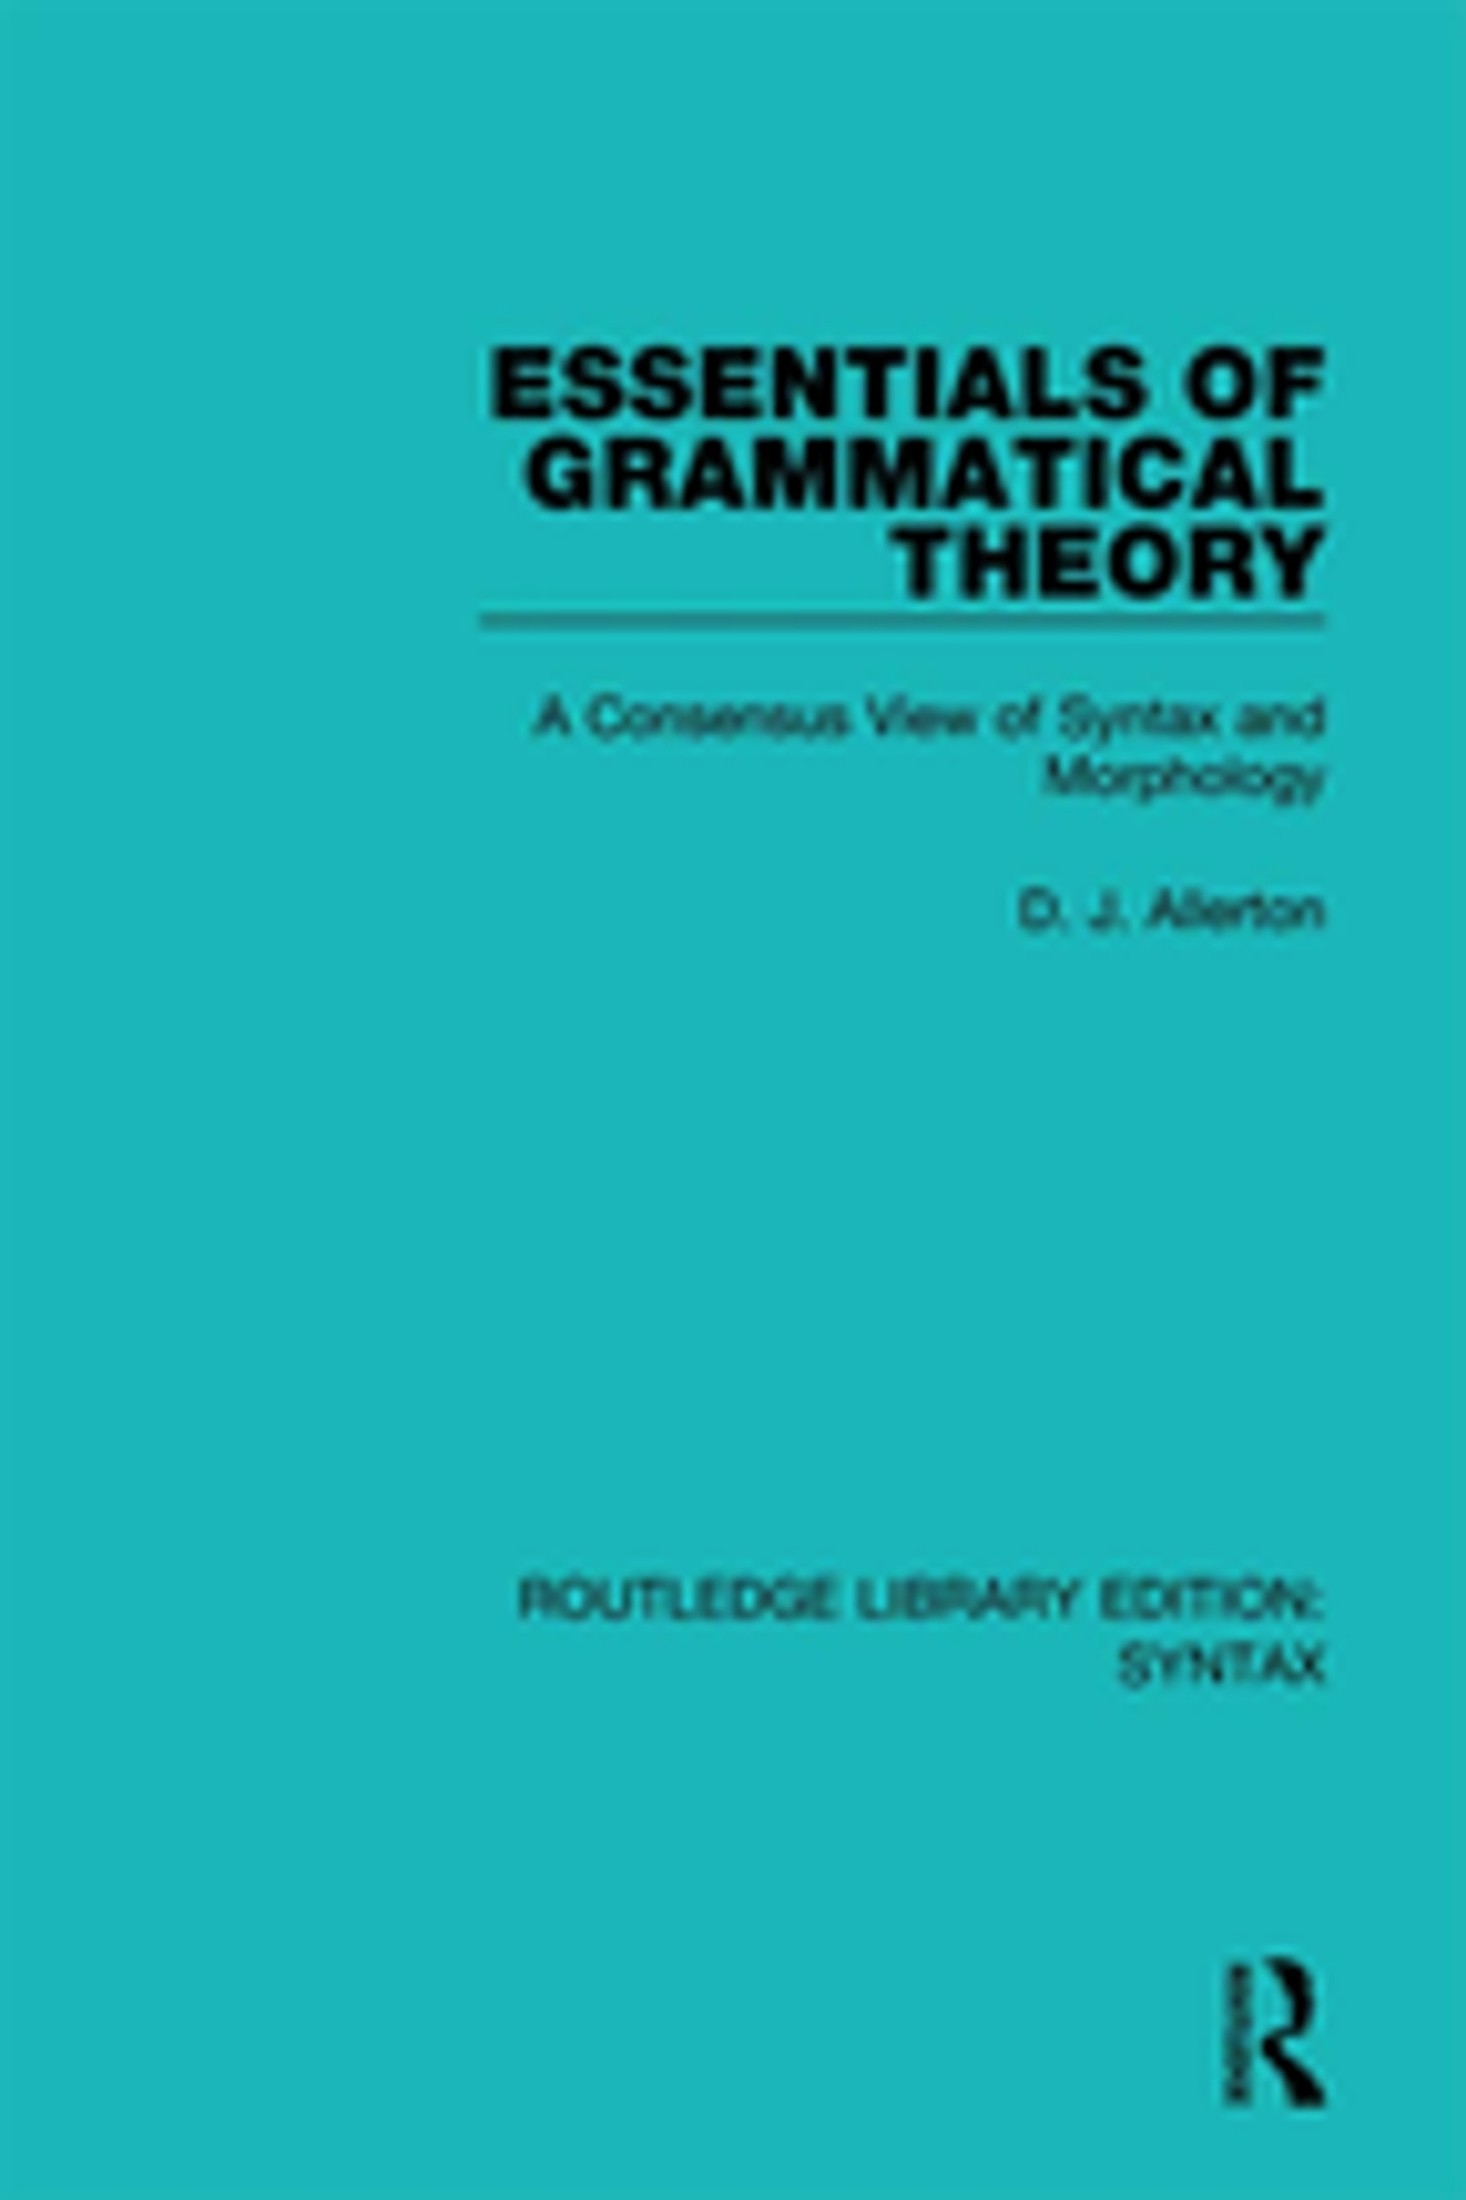 Essentials of Grammatical Theory: A Consensus View of Syntax and Morphology